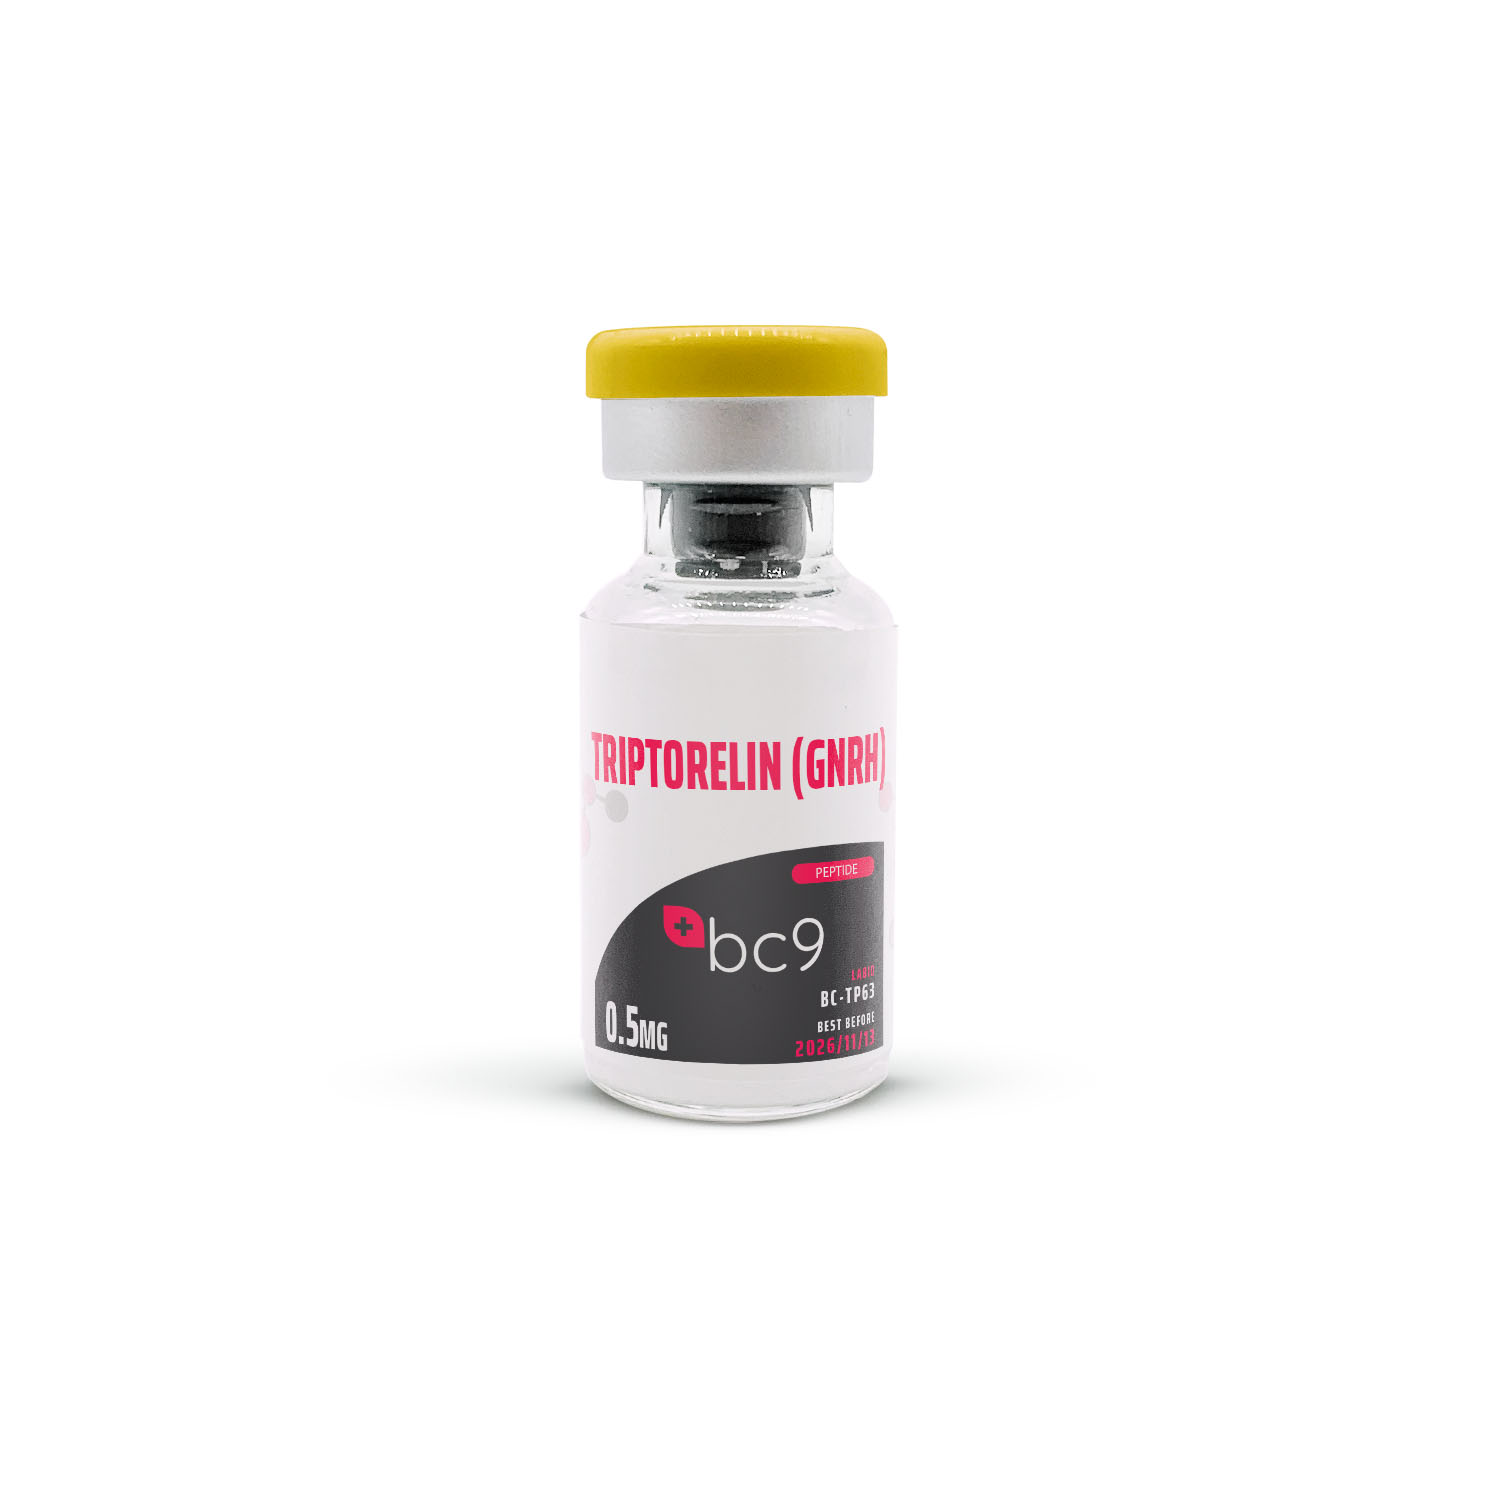 Triptorelin (GnRH) Peptide Vials | Highly Purified | BC9.org